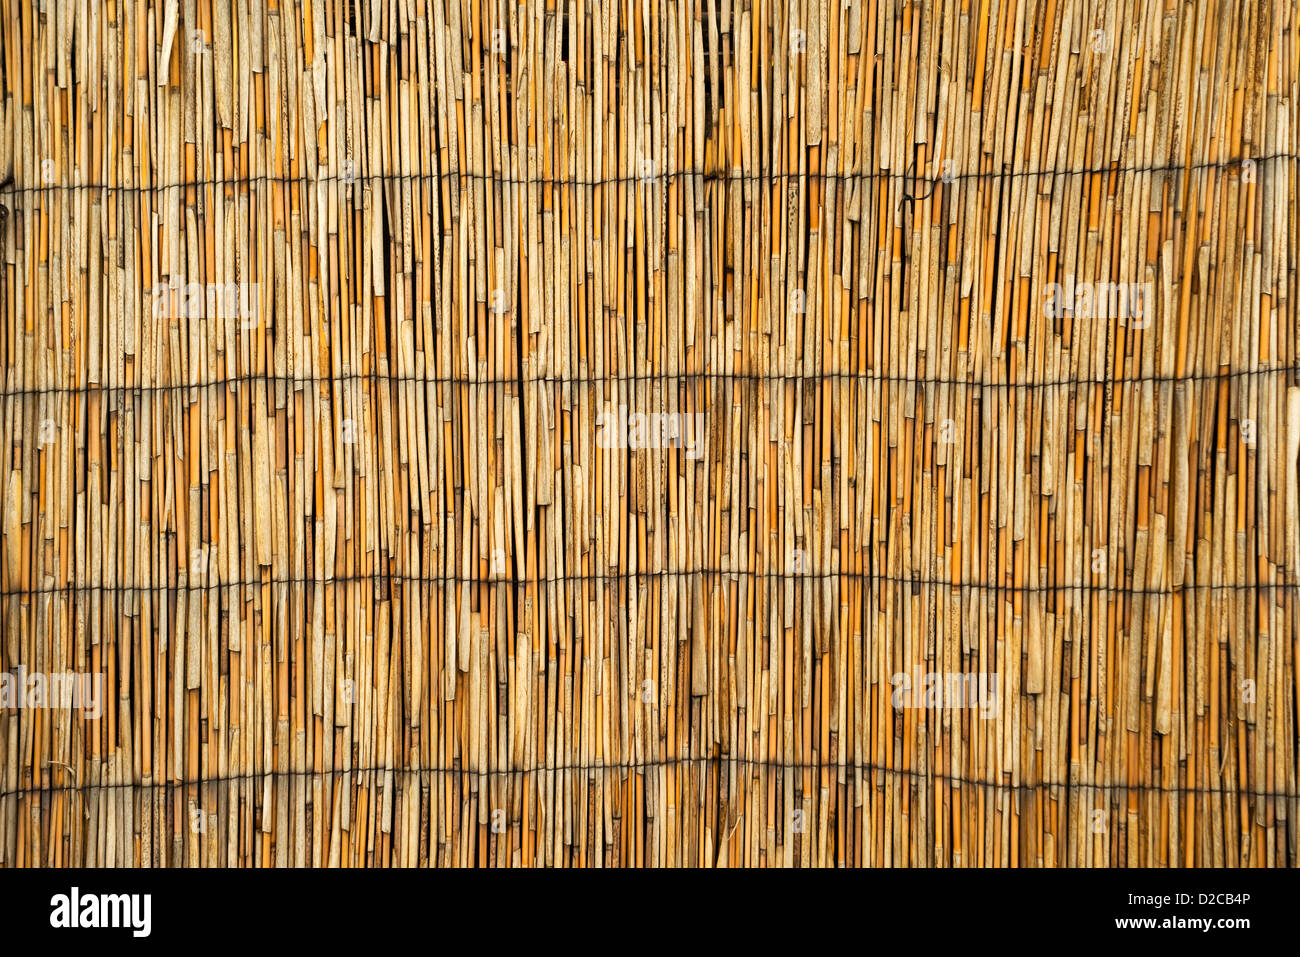 Cane roof texture, high res image of dry reed Stock Photo